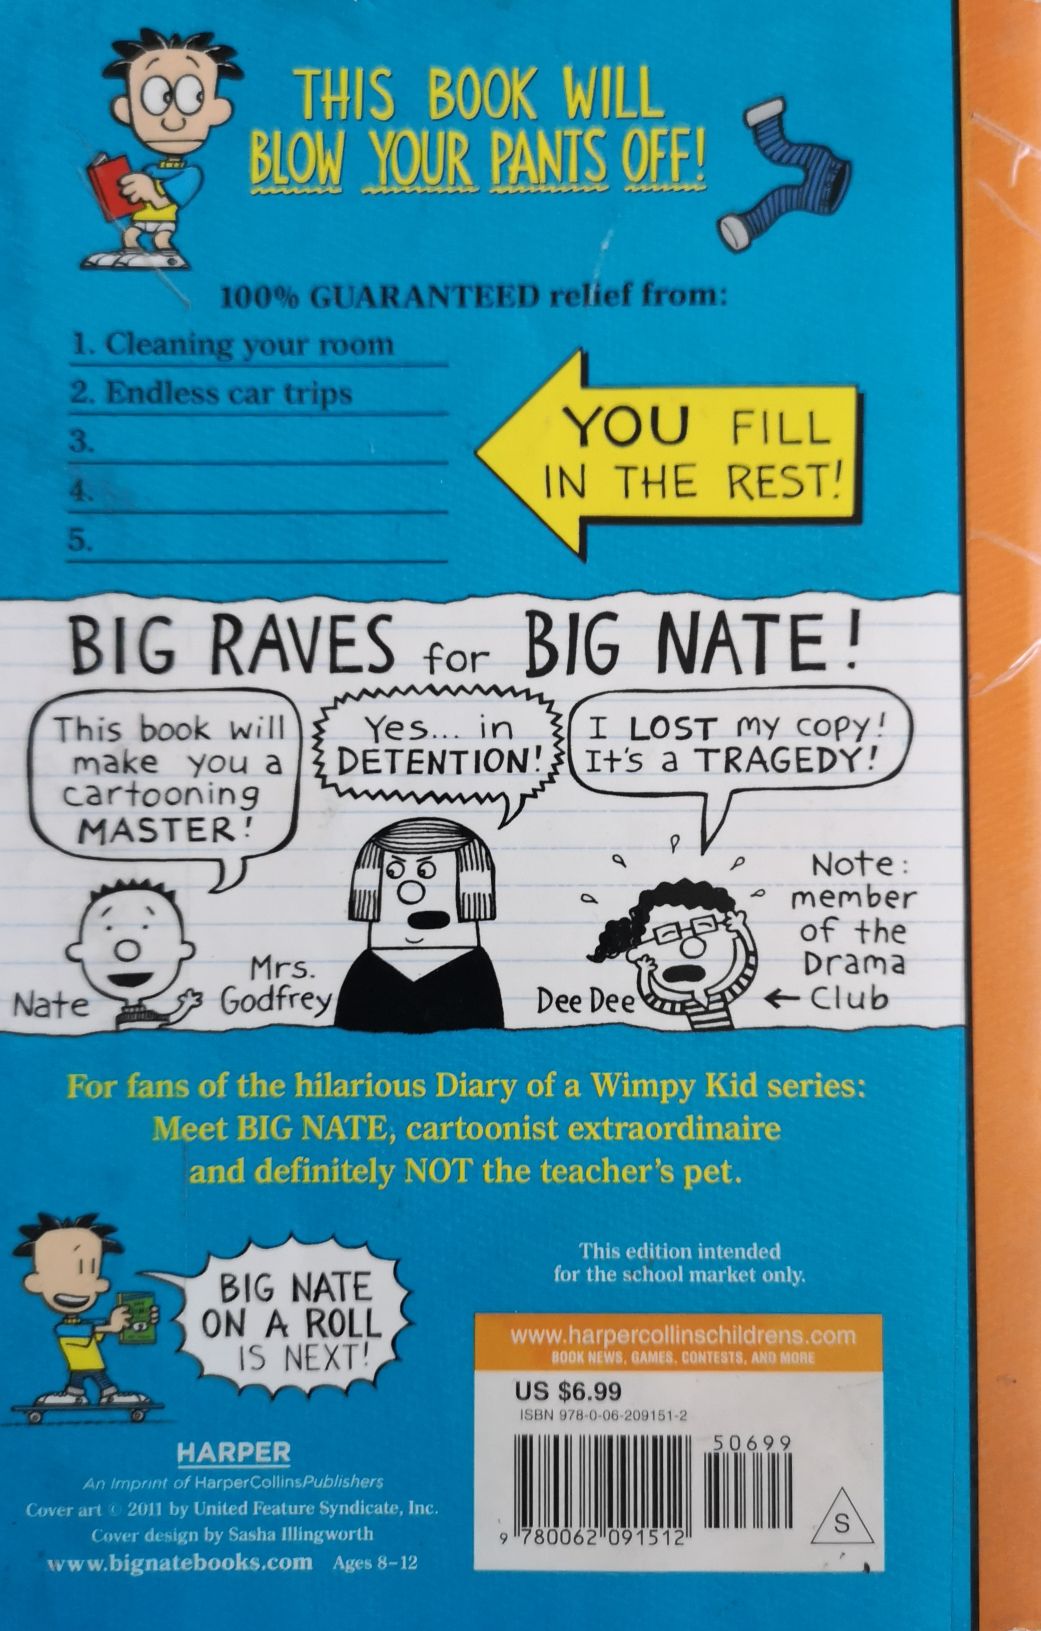 Big Nate Boredom Buster - Lincoln Peirce (Harper - Paperback) book collectible [Barcode 9780062091512] - Main Image 2